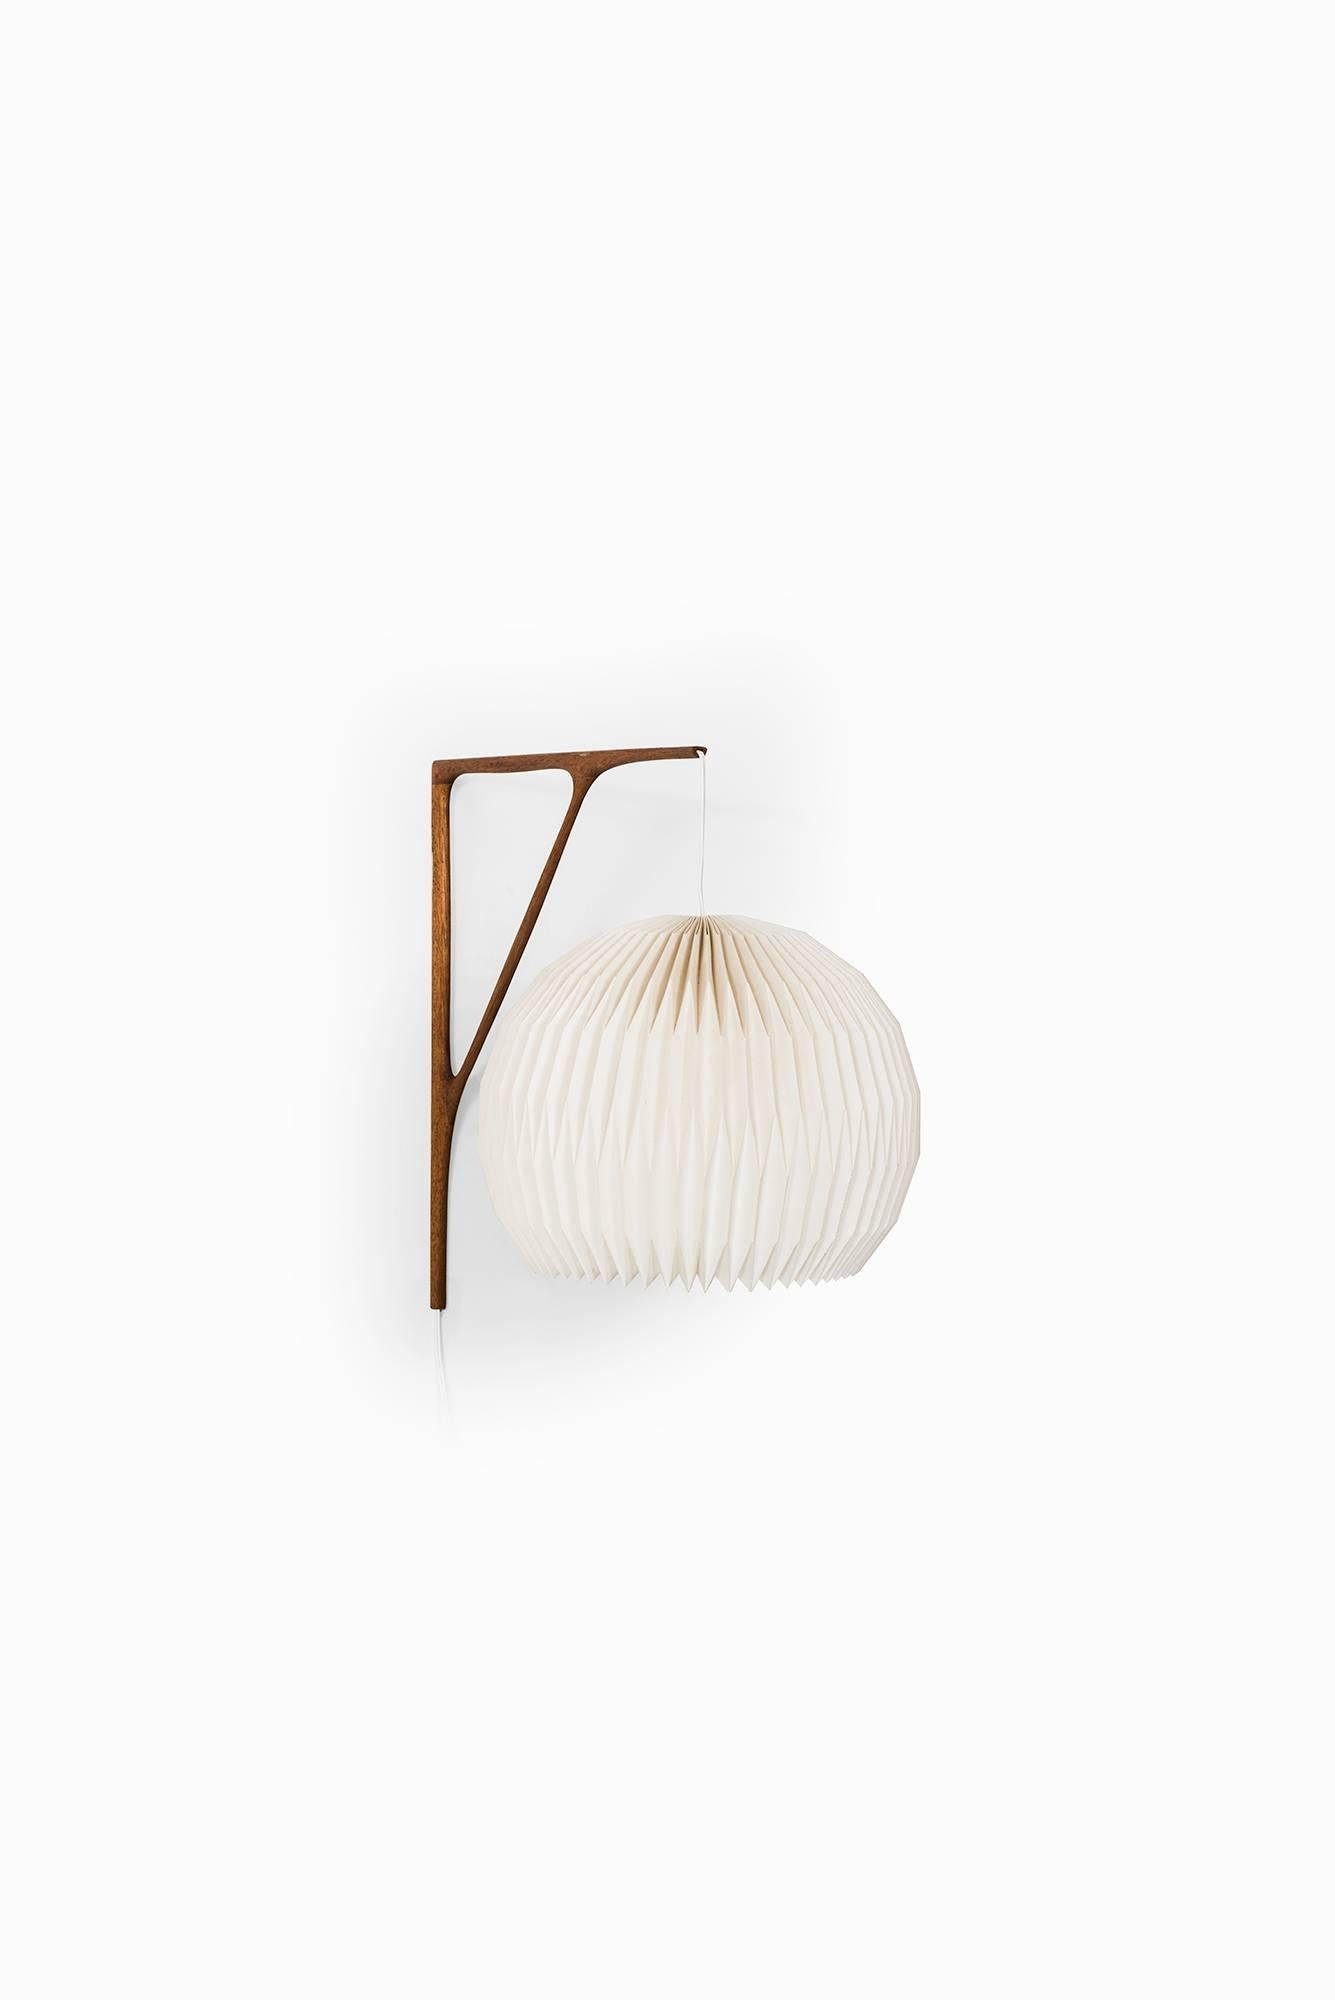 Sculptural Wall Lamp in Teak with Lamp Shade by Le Klint In Excellent Condition In Limhamn, Skåne län